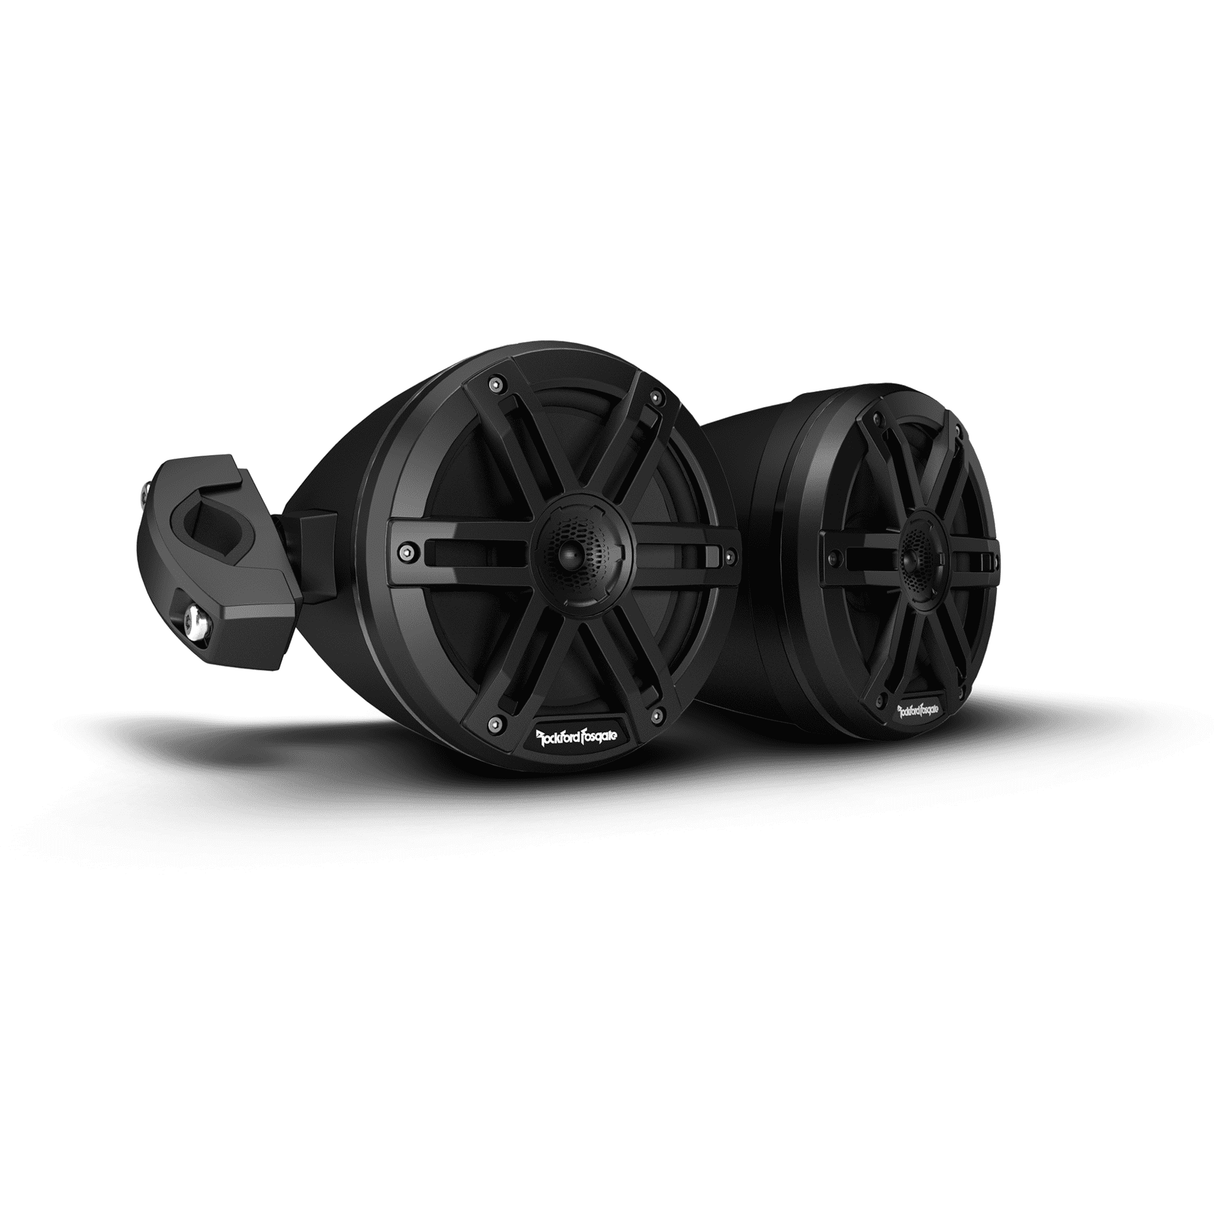 M0 6.5” Element Ready Moto-Can Speakers